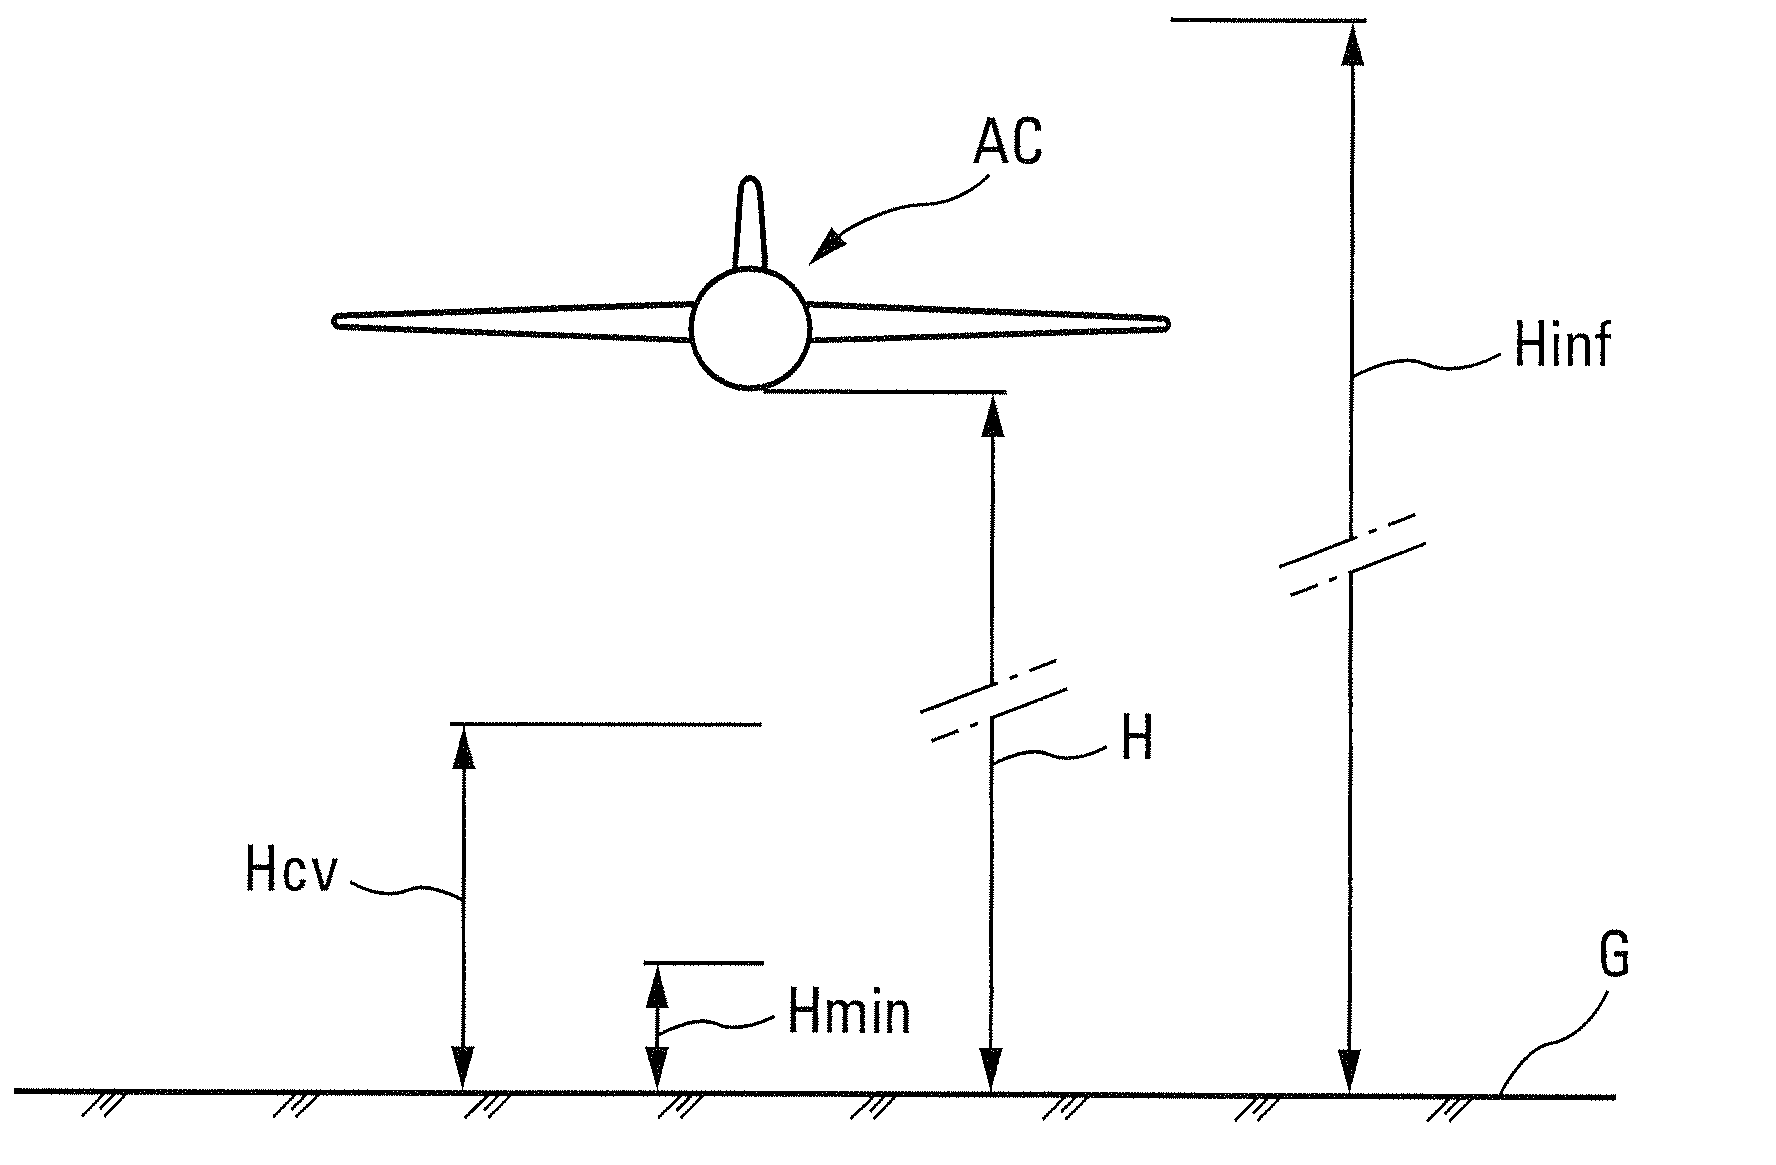 Hybrid method for estimating the ground effect on an aircraft